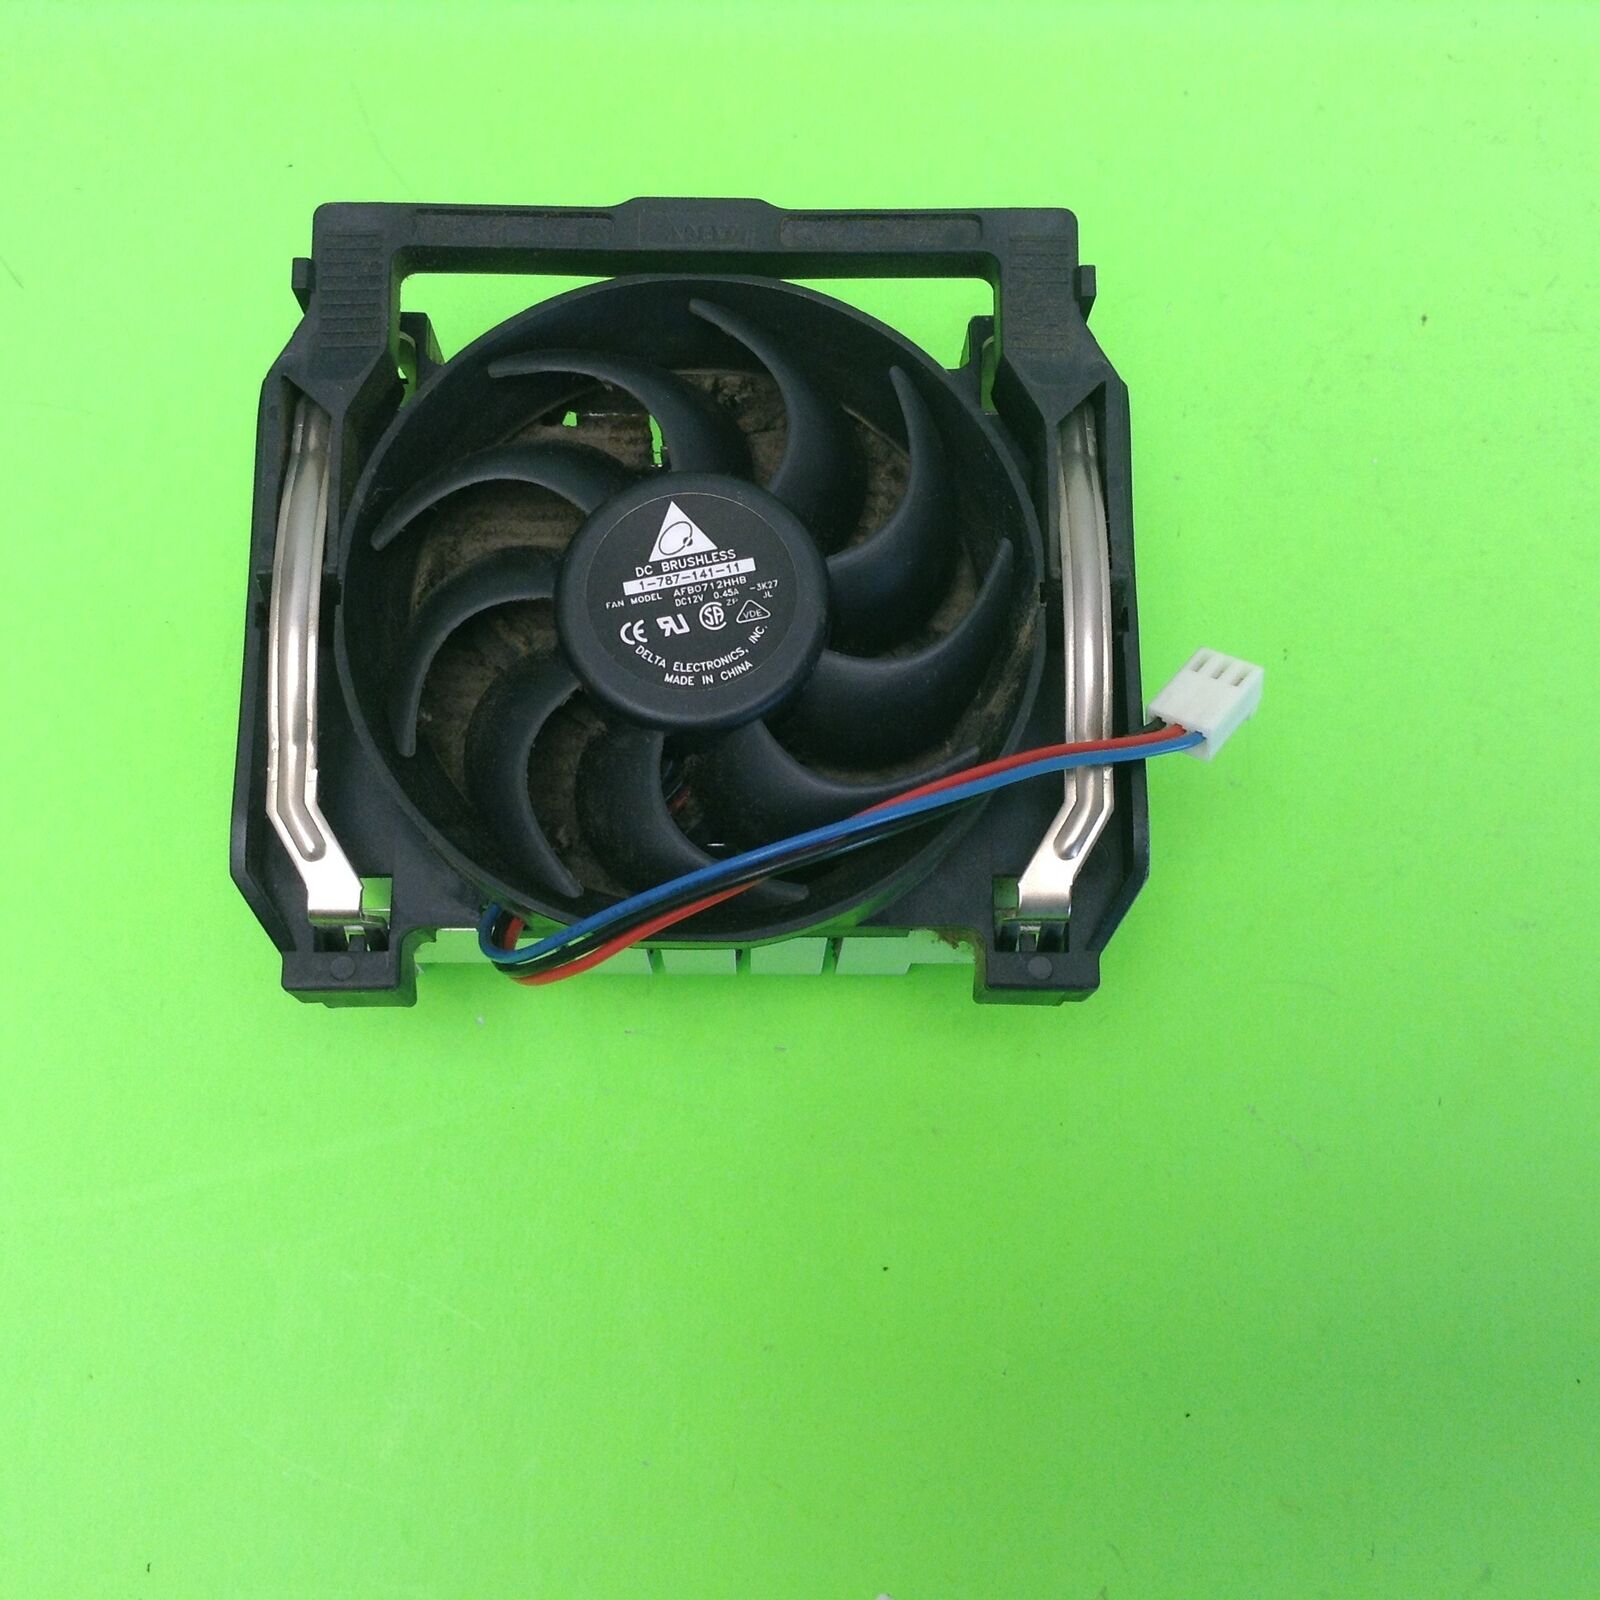 Sony VAIO PCV-2242 Computer Brushless Fan with Heat Sink